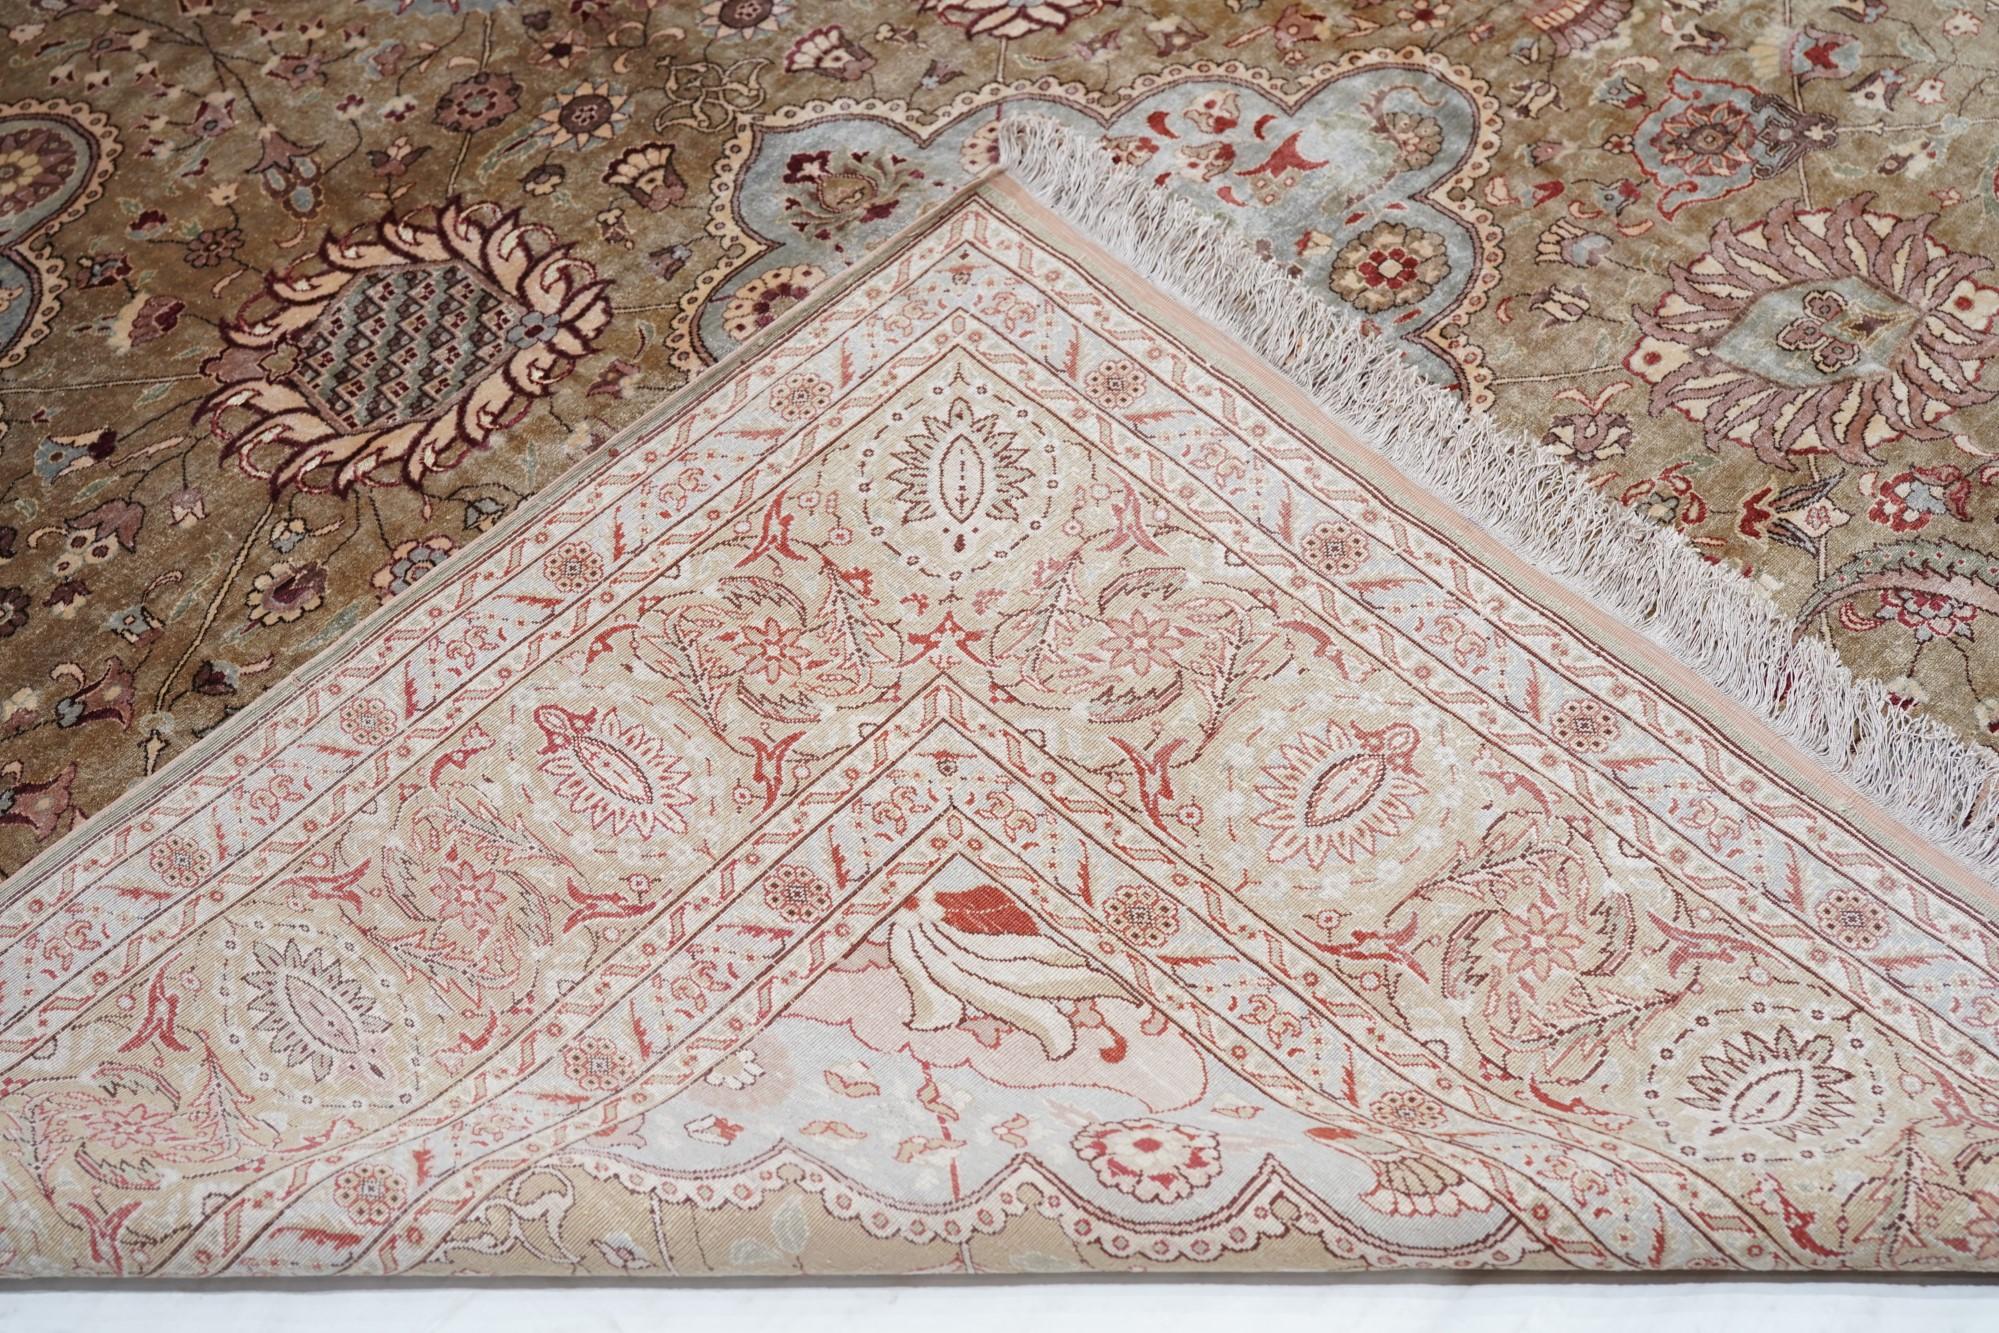 Antique Turkish Hereke Rug 6'7'' x 9'10''. Silk Hereke rugs are almost always in Persianate styles. Here the light red brown field displays two full and two half important pearl-tone, scalloped escutcheons, along with a central rosette and tilted,